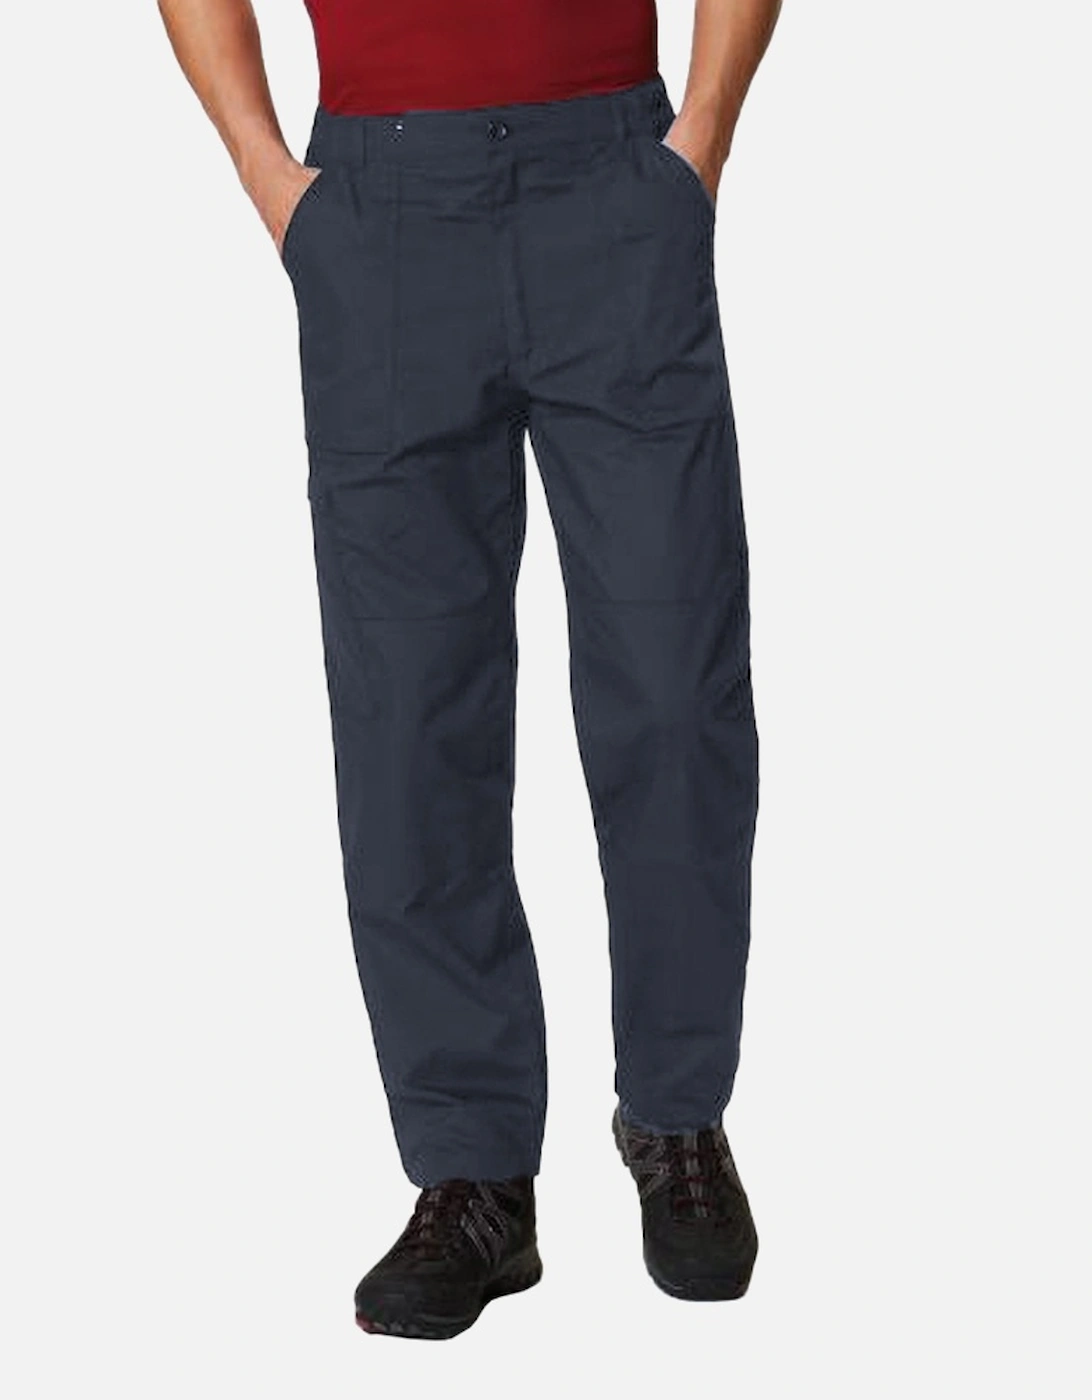 Mens New Lined Action Trouser (Long)